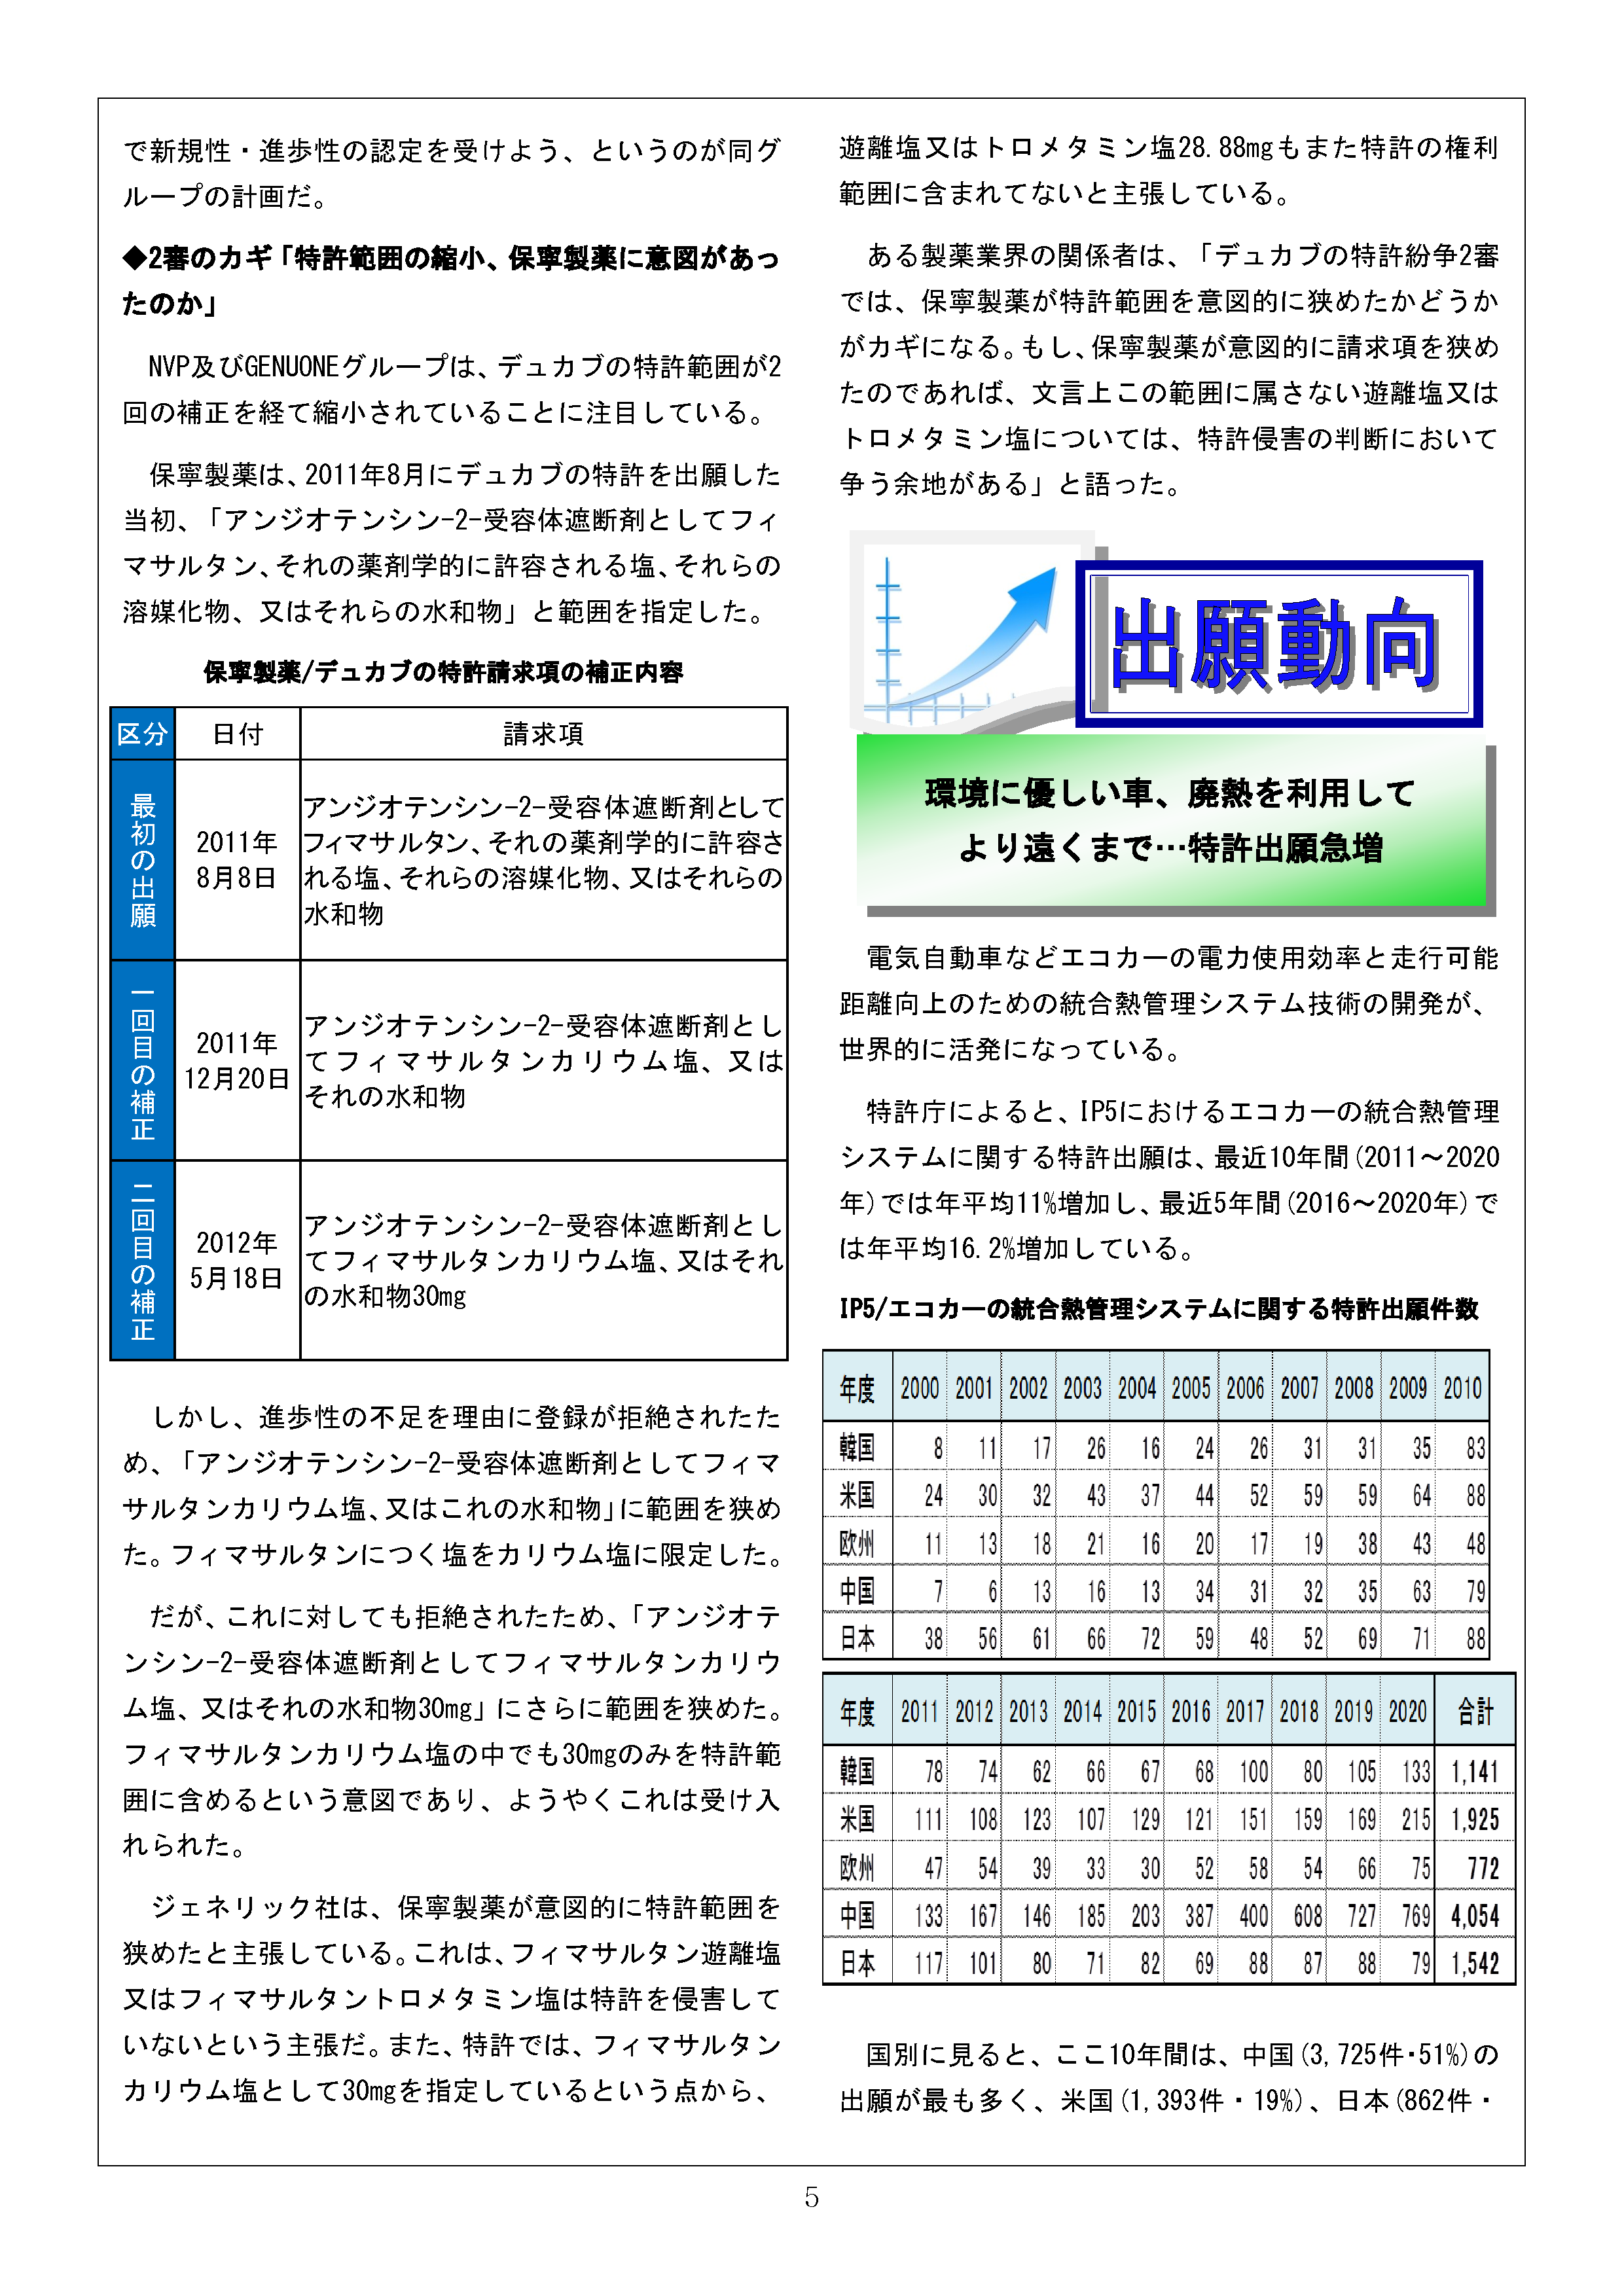 Newsletter_202208_5.png